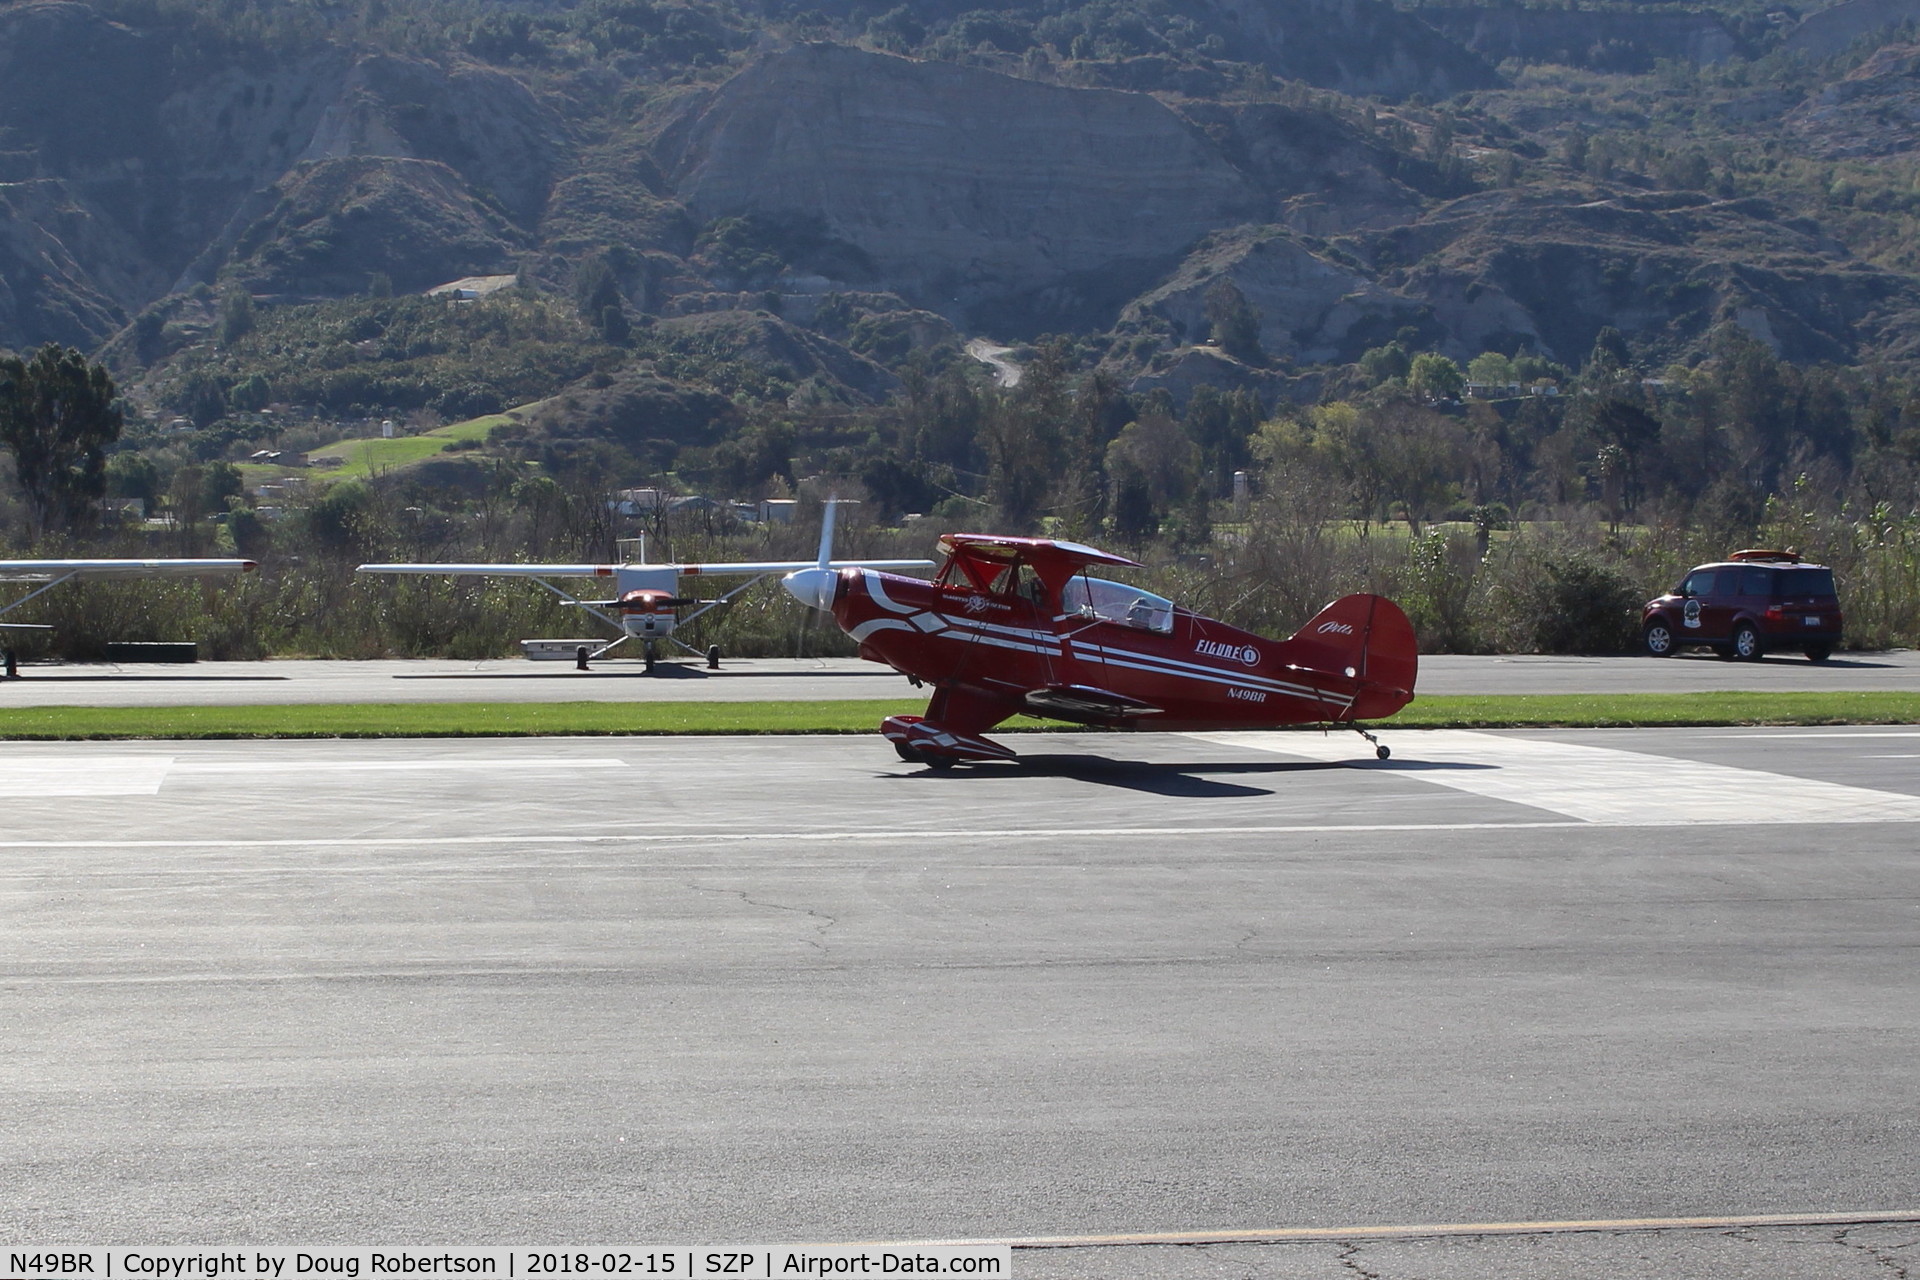 N49BR, Pitts S-2A Special C/N 2212, 1983 Aerotek PITTS S-2A SPECIAL, Lycoming AEIO-360 180 Hp, takeoff roll Rwy 04